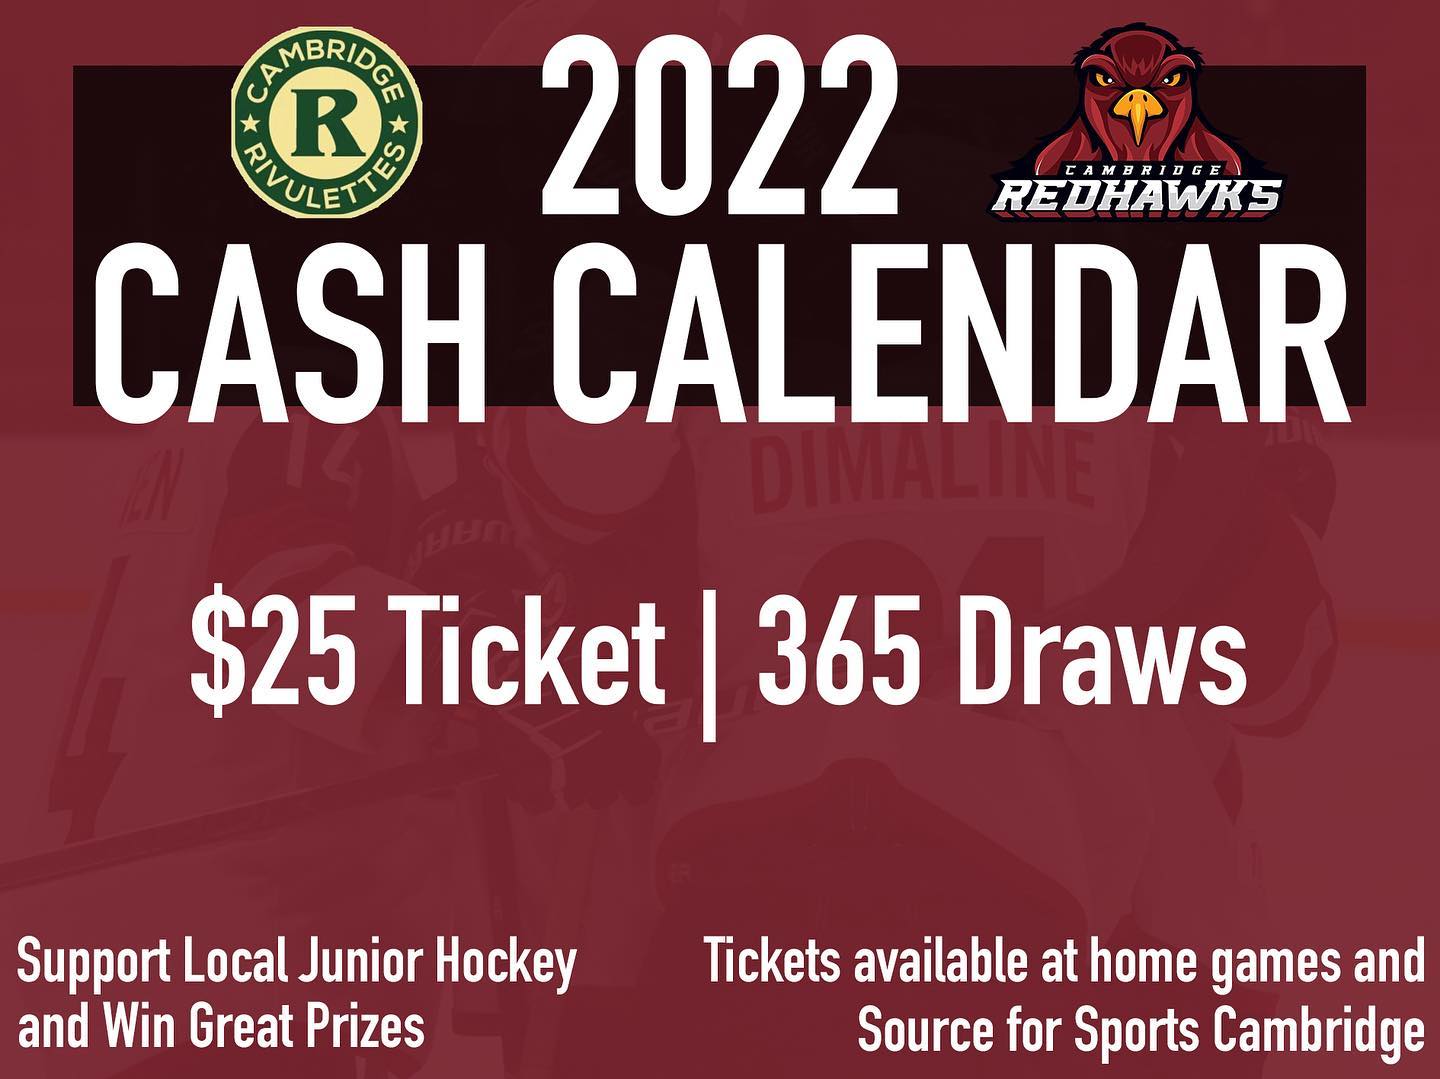 Remember that Cash Calendars are still available until this Saturday!

Order yours online today or email Cindy at cstewart@cambridgeredhawks.com

🔗: https://www.cambridgeredhawks.com/cash-calendar-2022